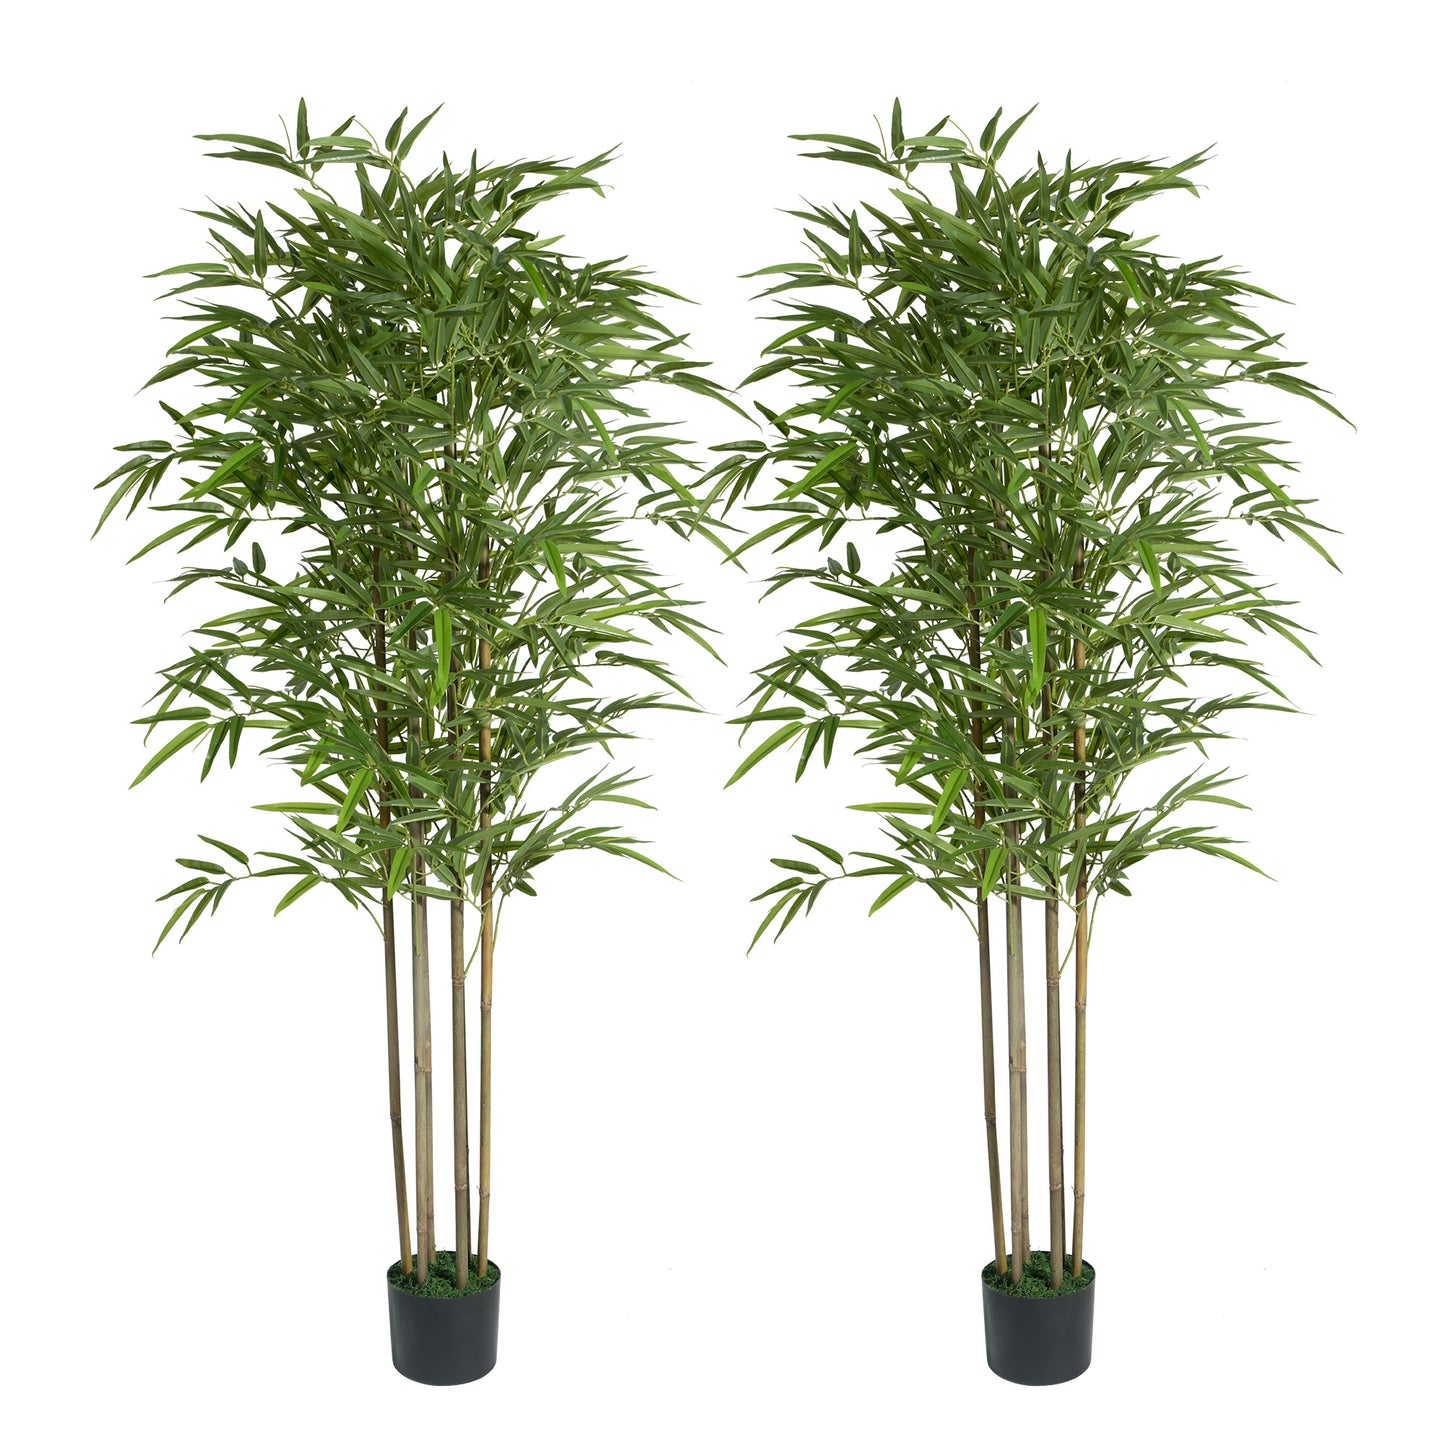 Bamboo Silk Tree, 60-Inch Artificial Bamboo Tree, Realistic Faux Bamboo Tree in Nursery Pot Fake Decorative Trees for Home, Office, Indoor & Outdoor Decor